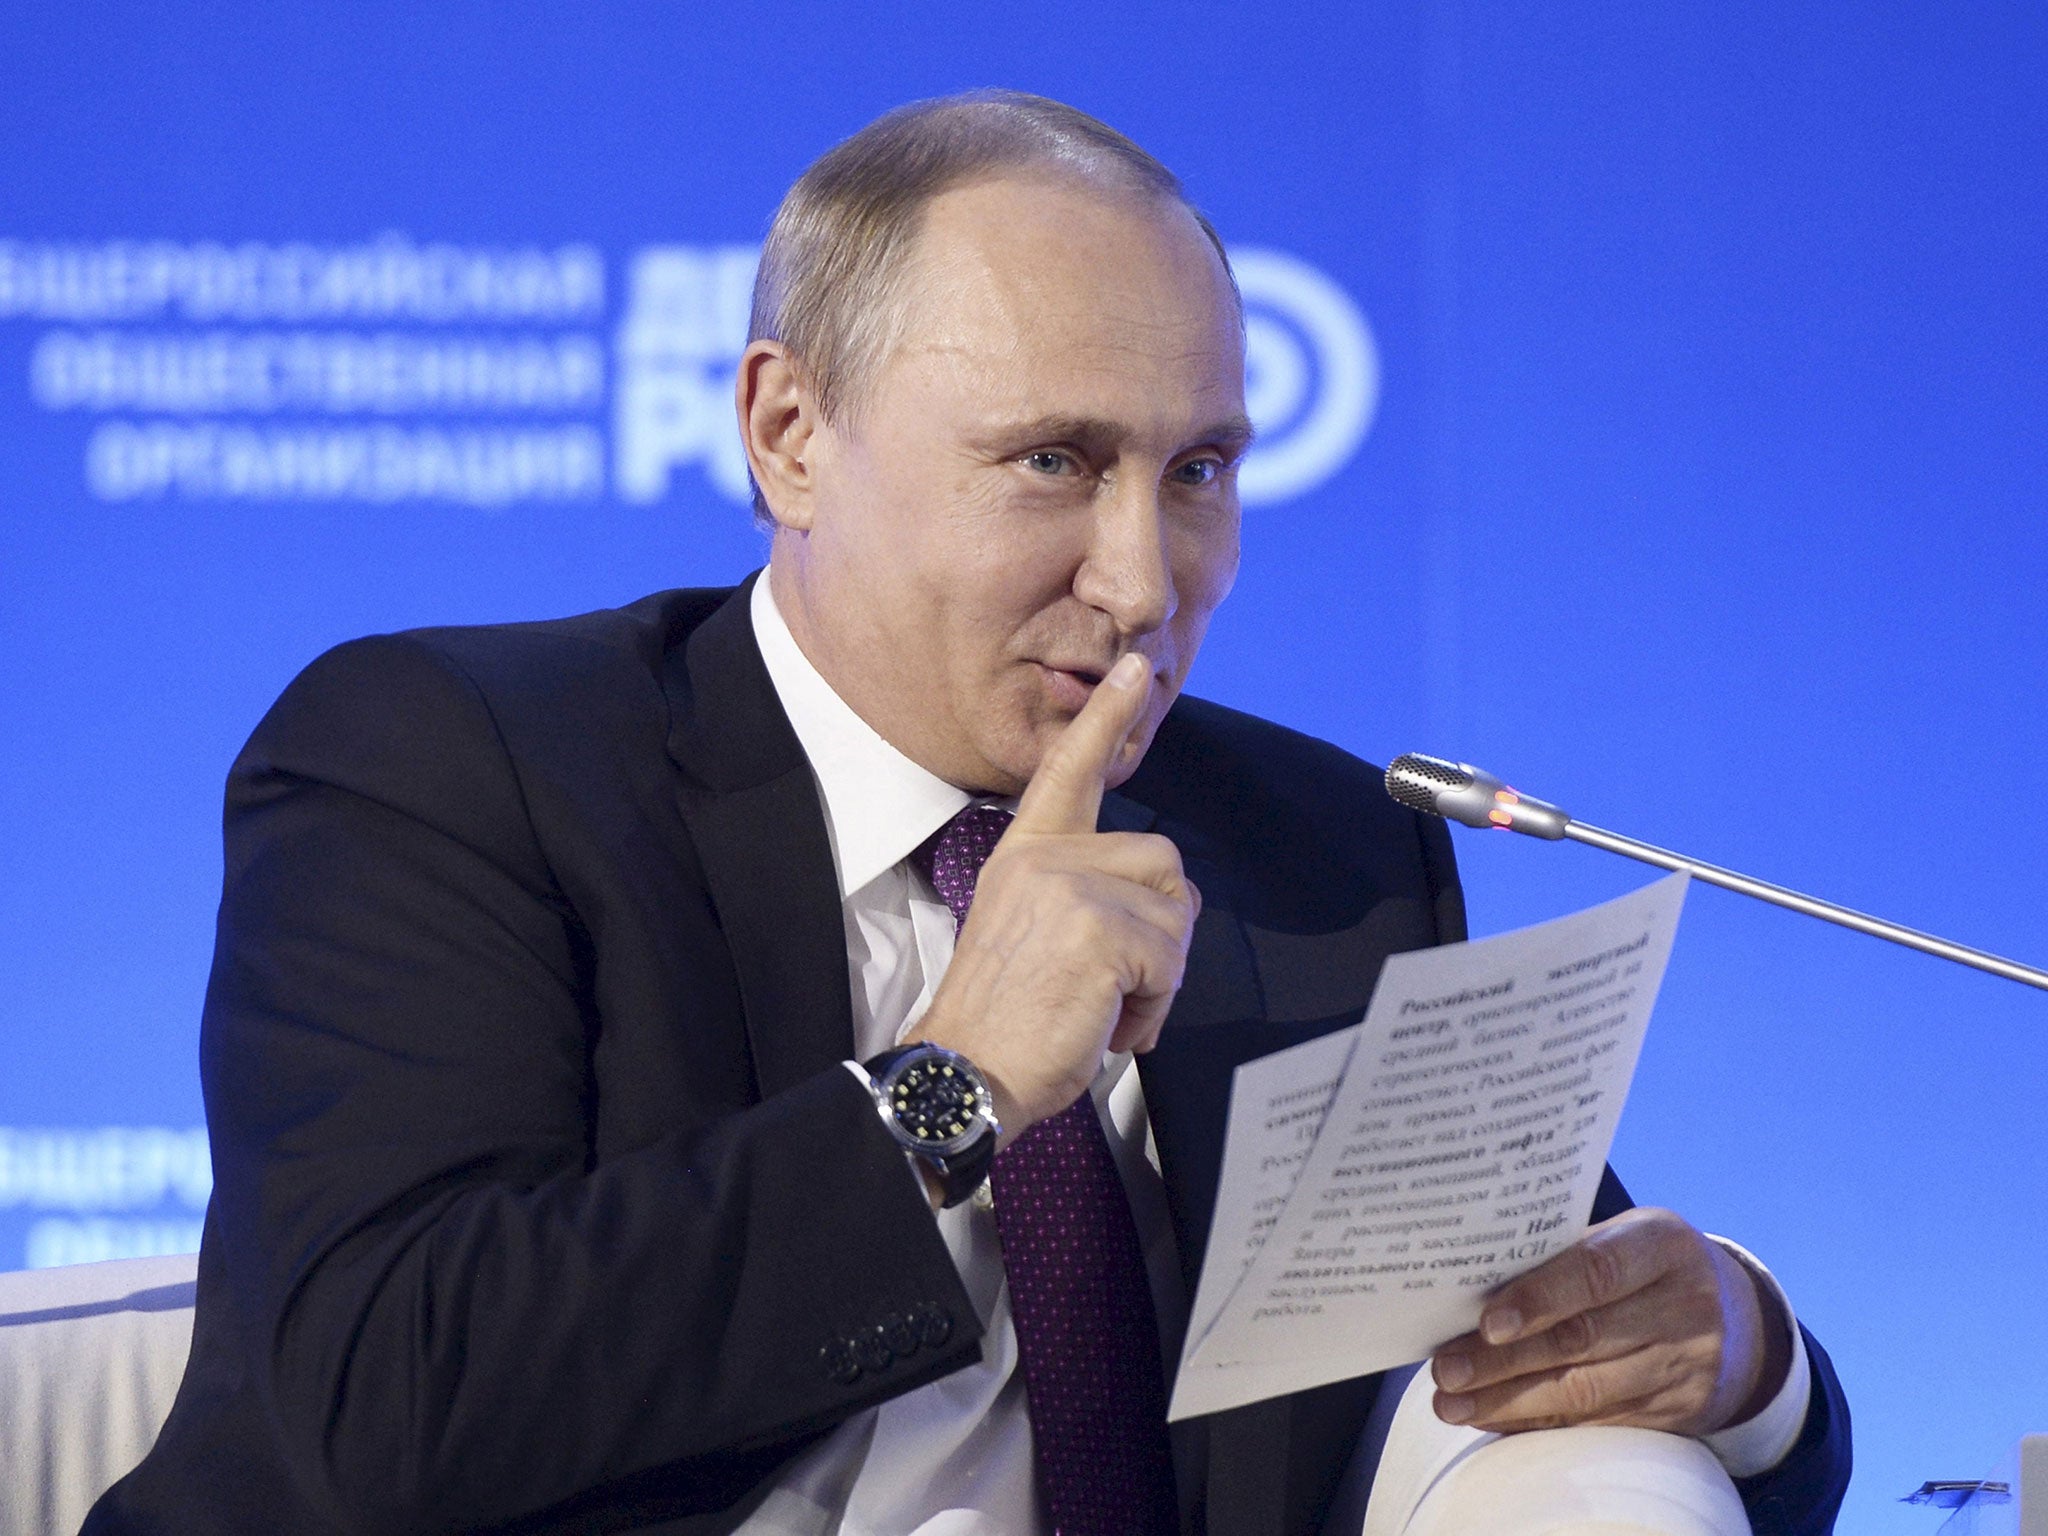 A picture of Vladimir Putin, issued by the Kremlin, from a conference on 26 May